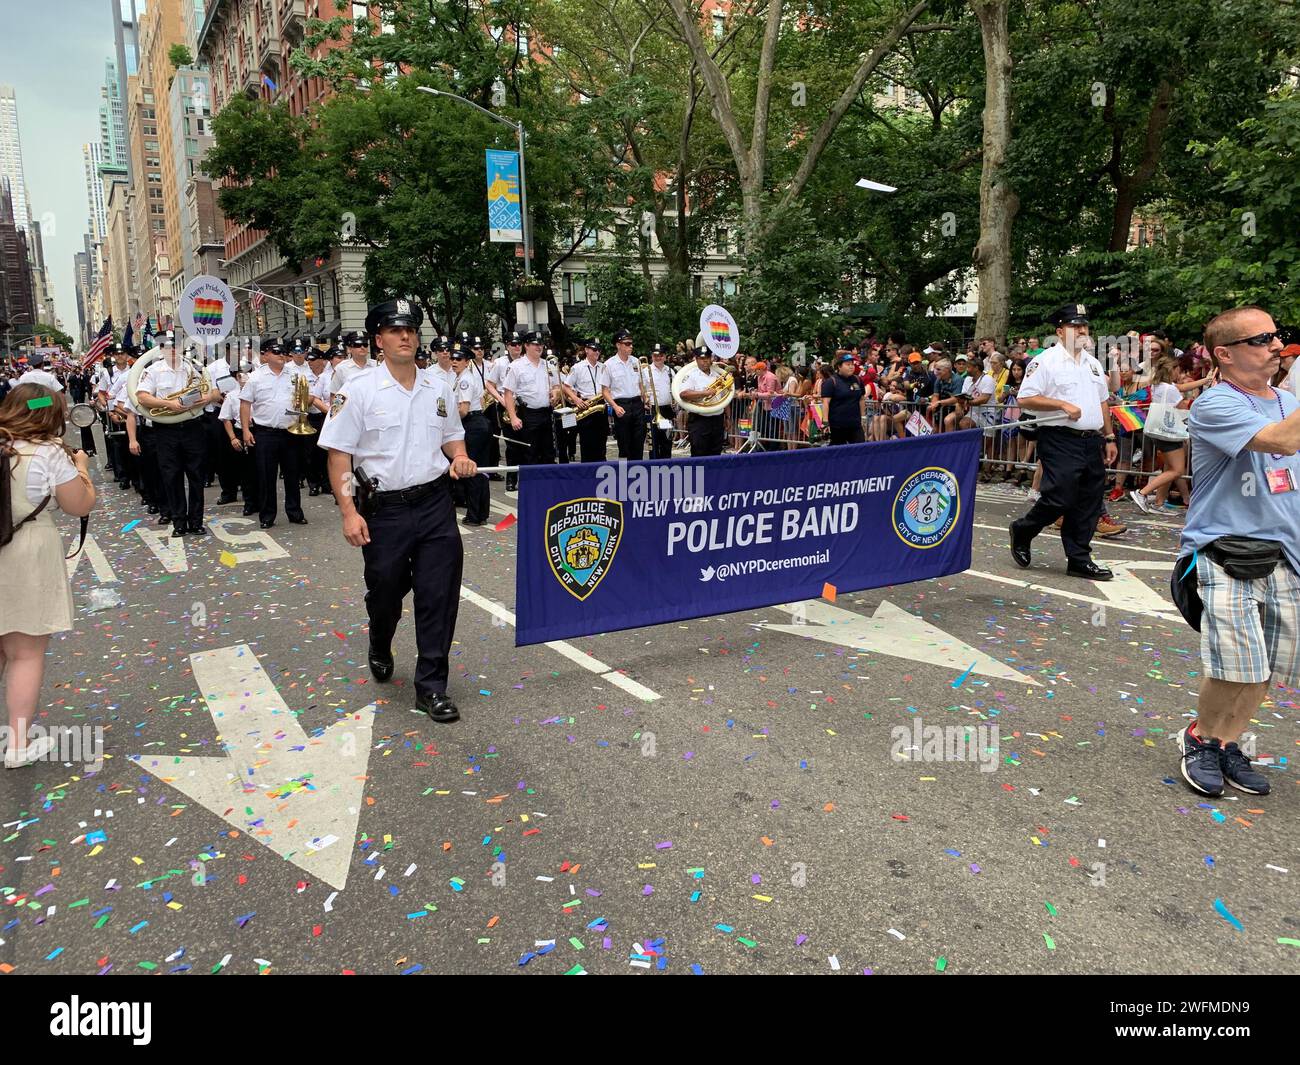 The NYPD shows their support for the LBGT community with their marching band participating in the Gay Pride Parade Stock Photo